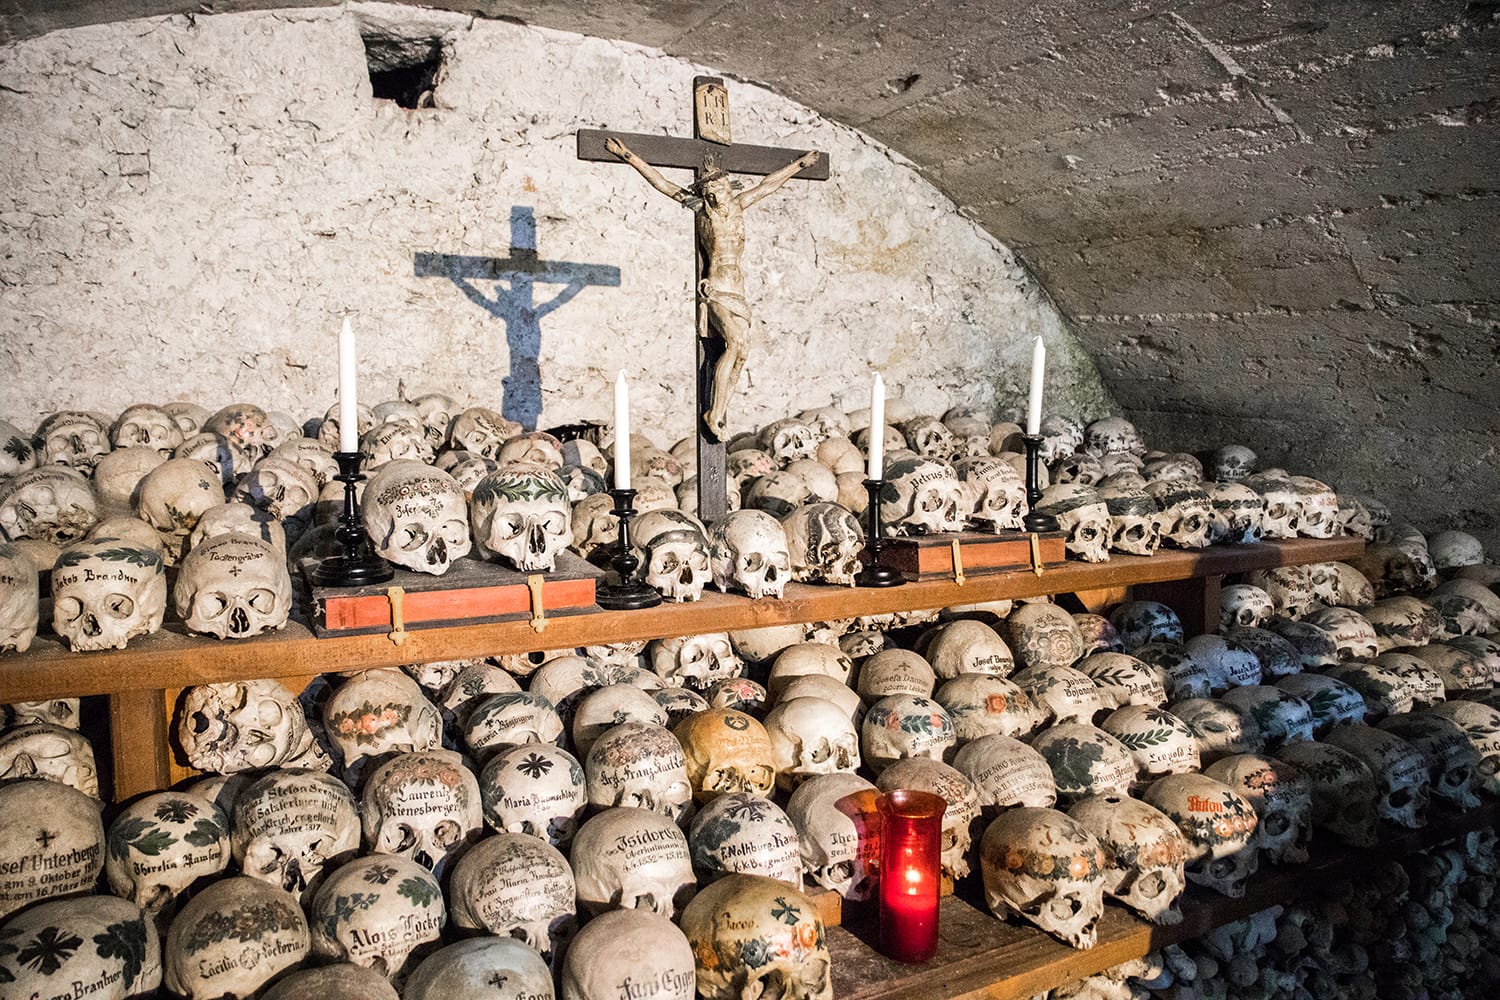 Skulls painted with names, colorful flowers and crosses in the Charnel House or Beinhaus, Hallstatt, Austria